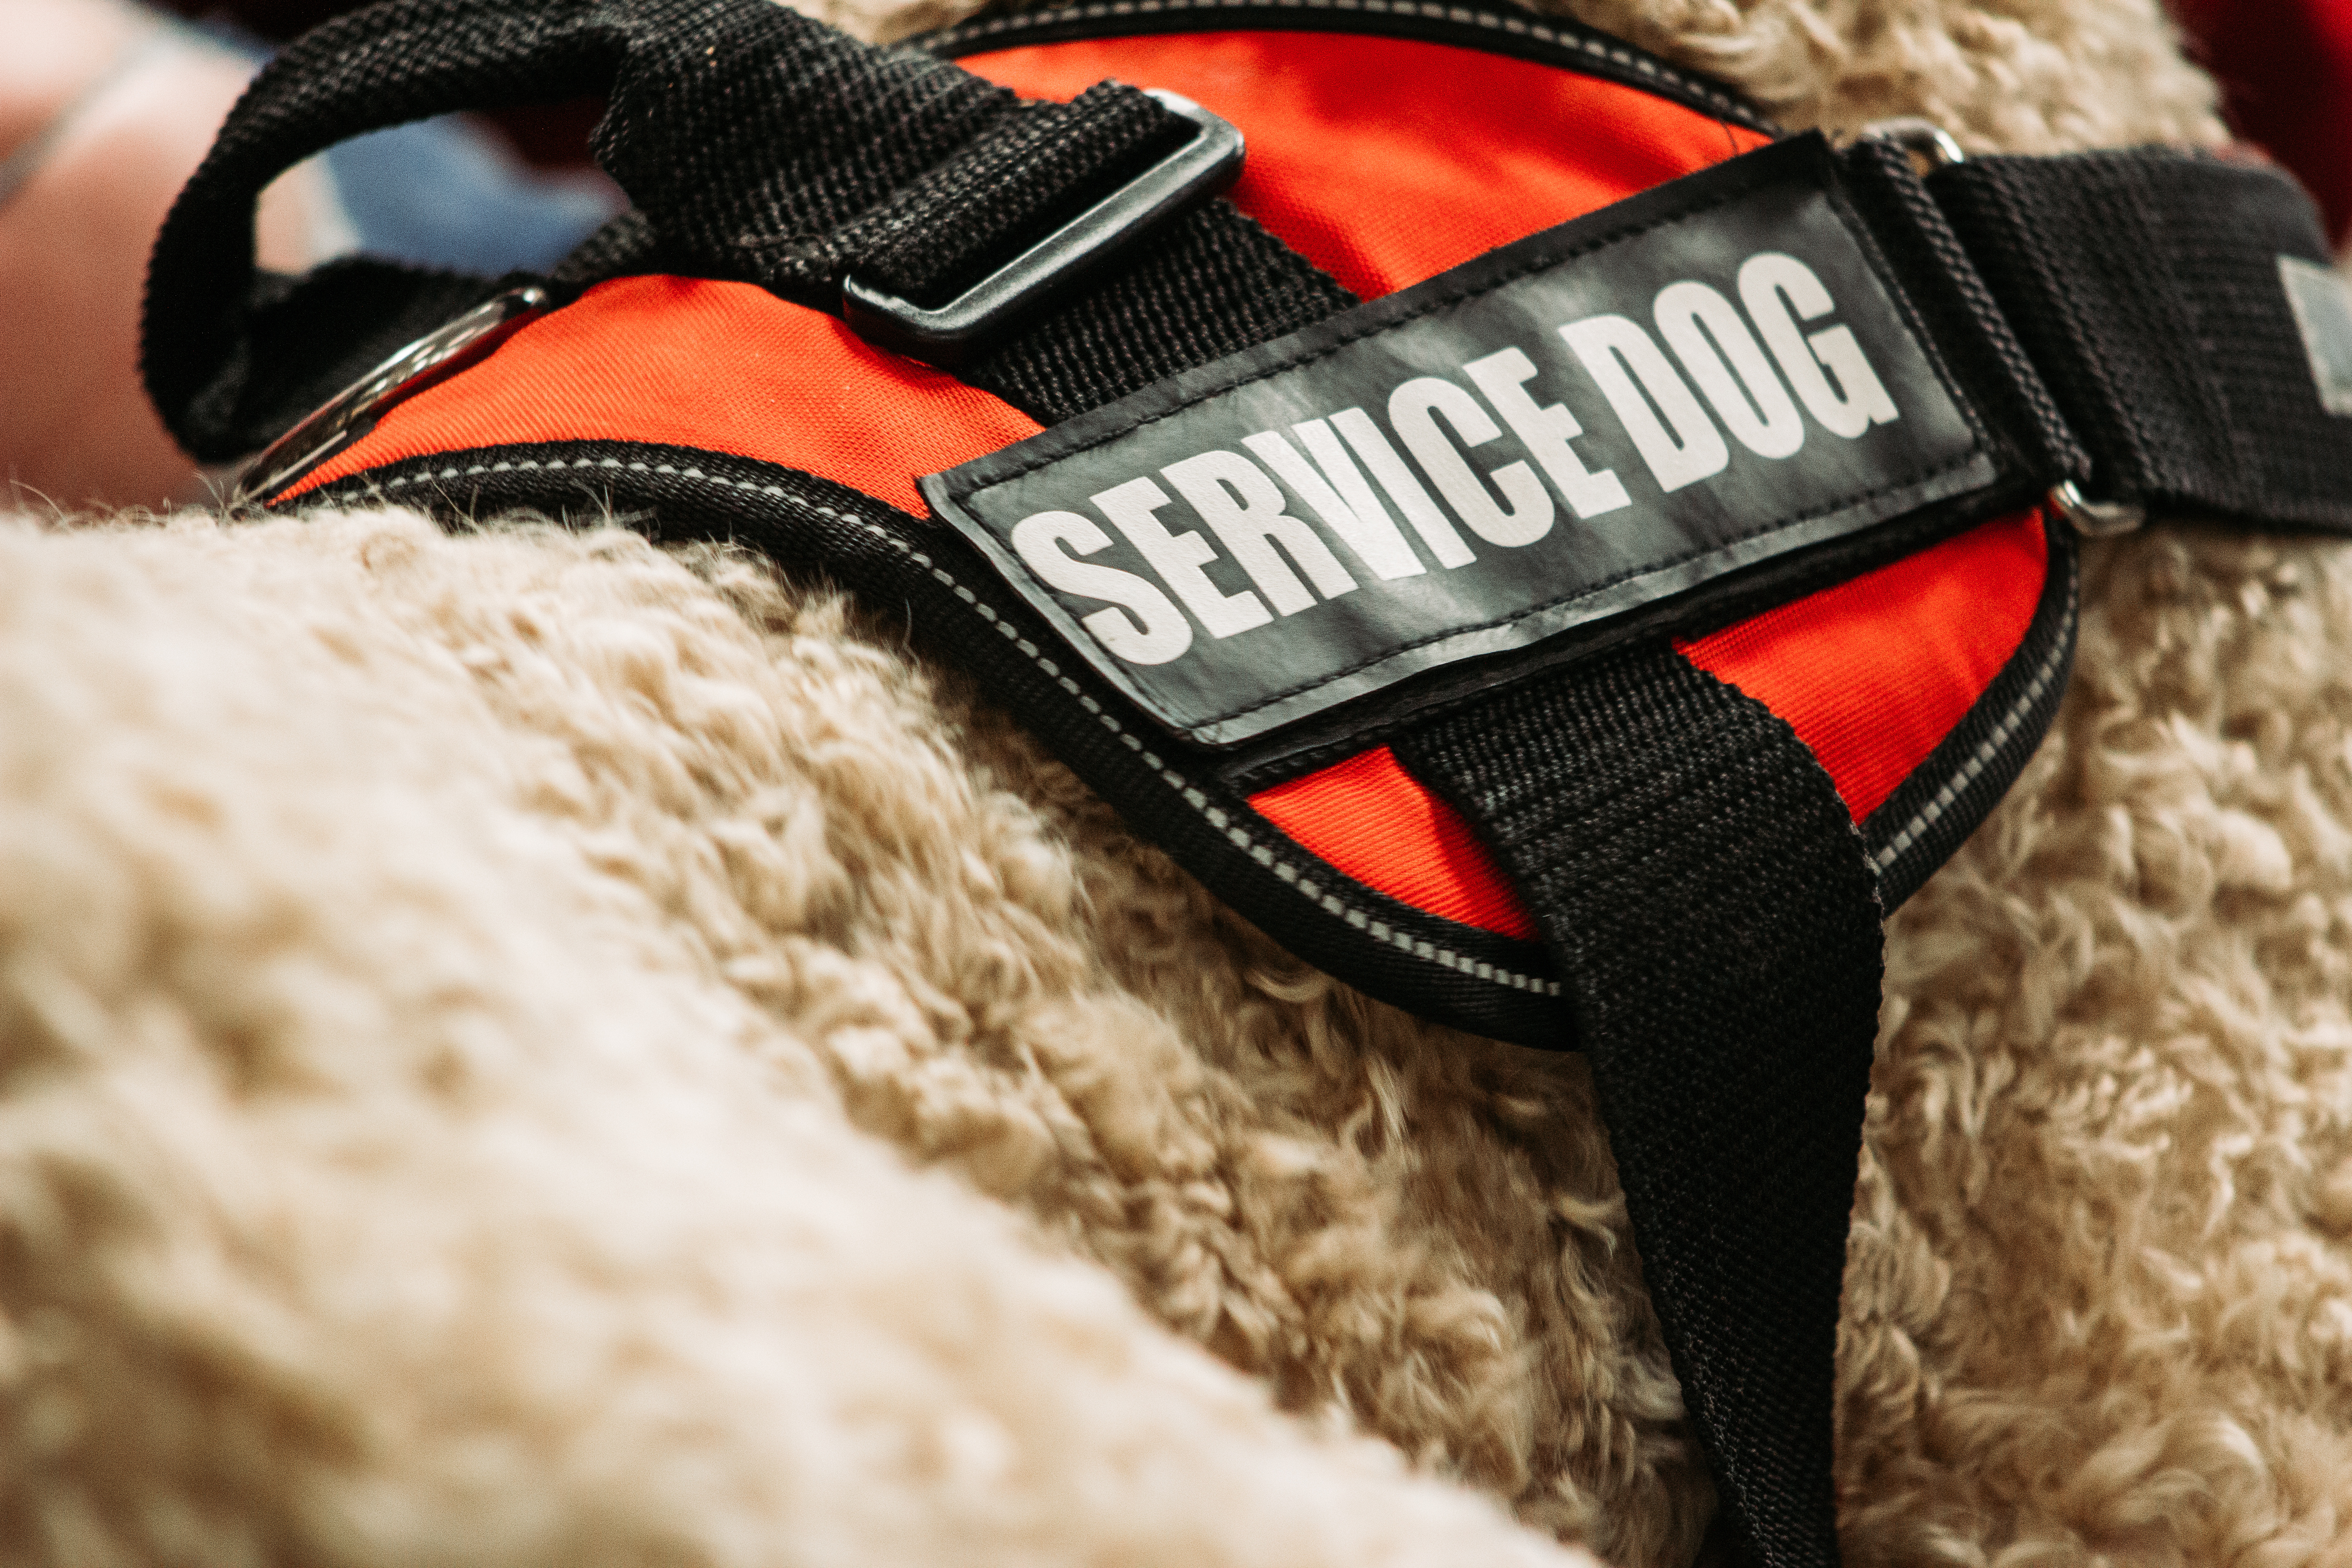 A service dog's jacket, worn by a dog trained by the experts at Dog Training Elite in Scottsdale, AZ.